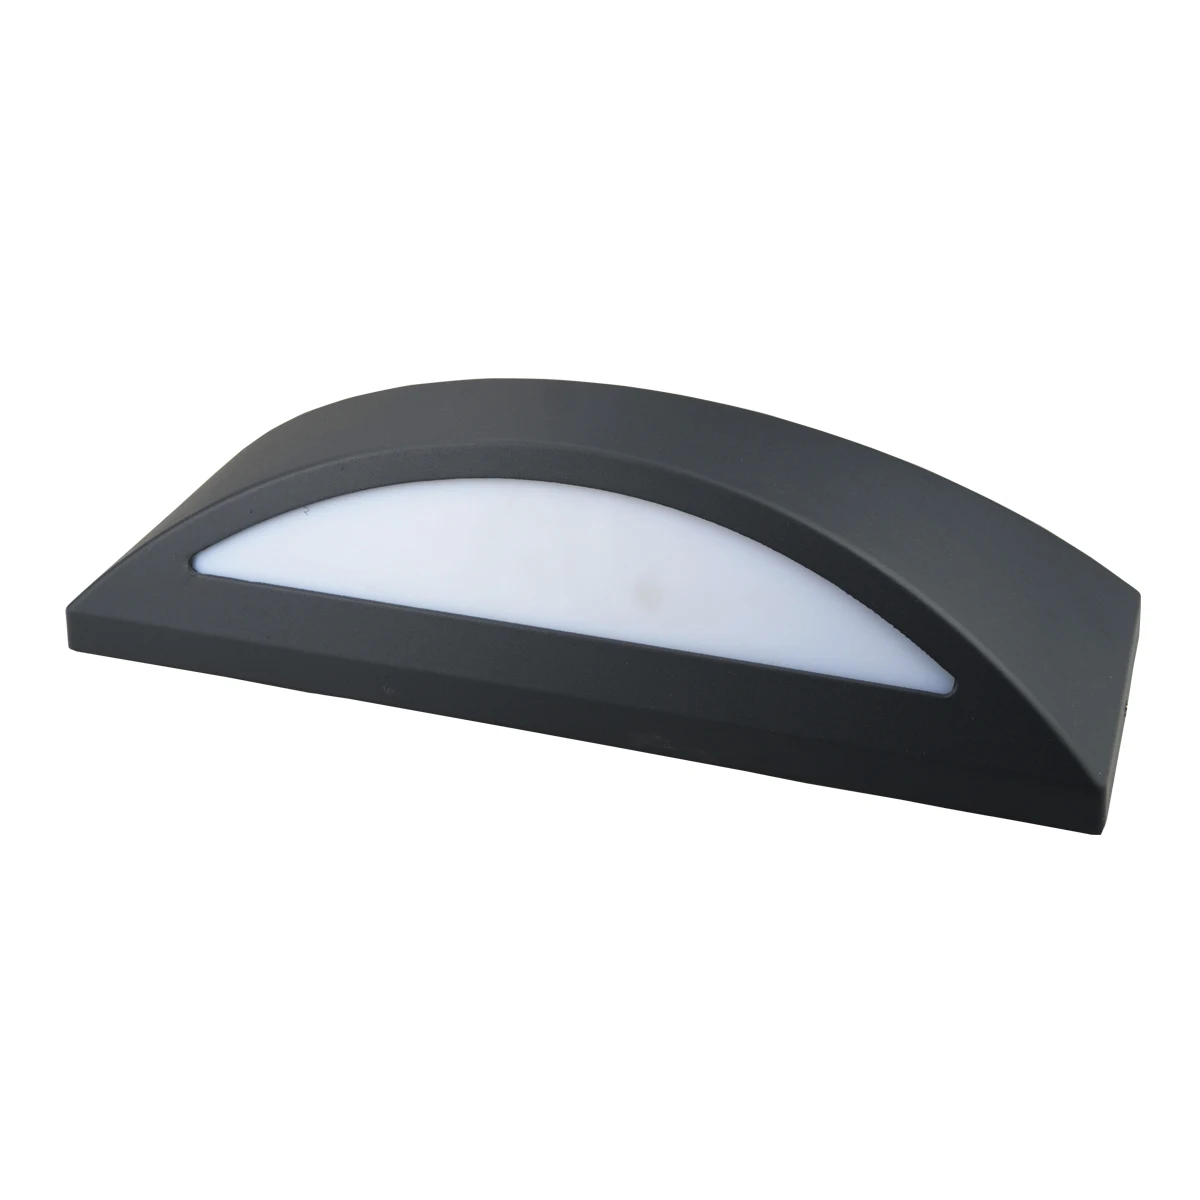 Stand Alone Intergrat Cost effective up and down wall light led